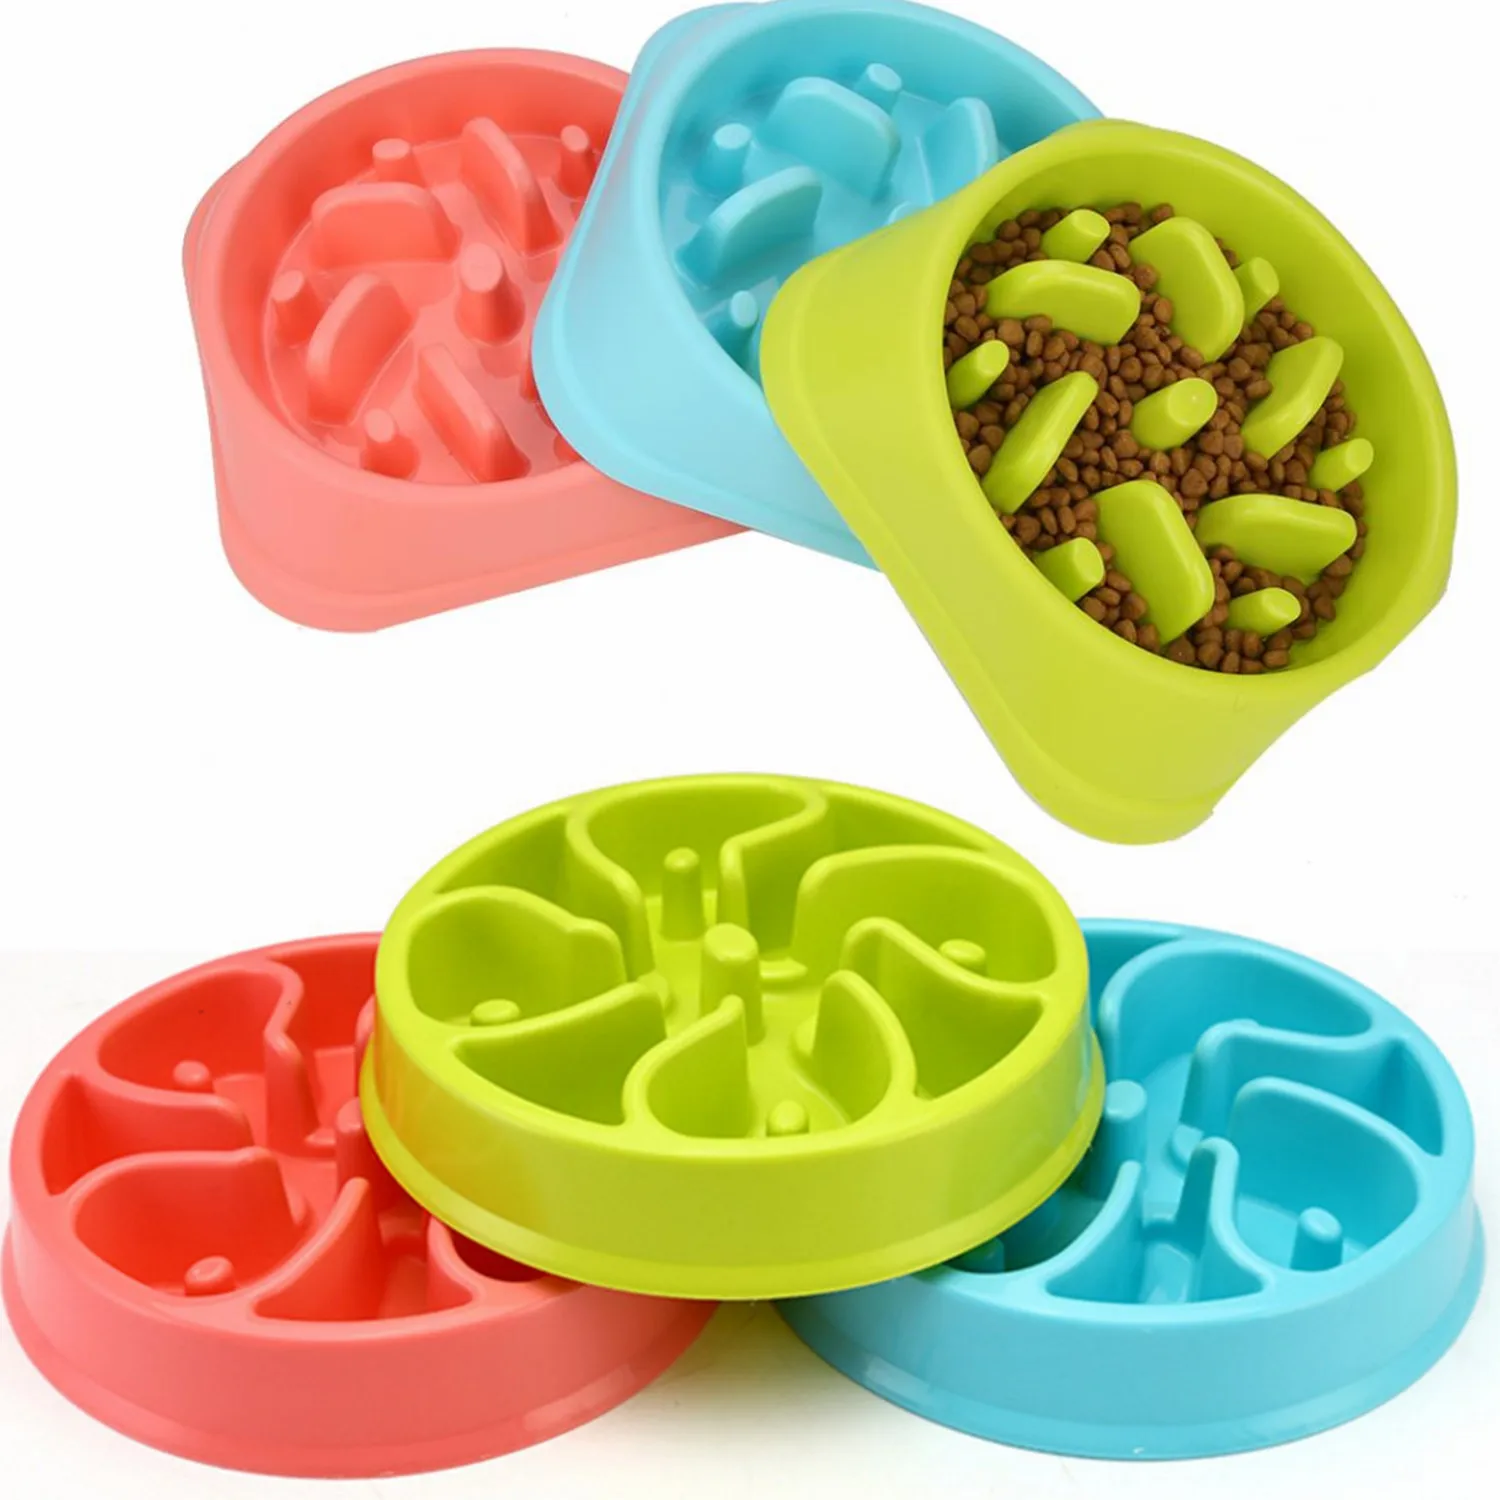 

Portable Pet Dog Feeding Food Bowls Puppy Slow Down Eating Feeder Dish Bowel Prevent Obesity Dogs Supplies Dropshipping